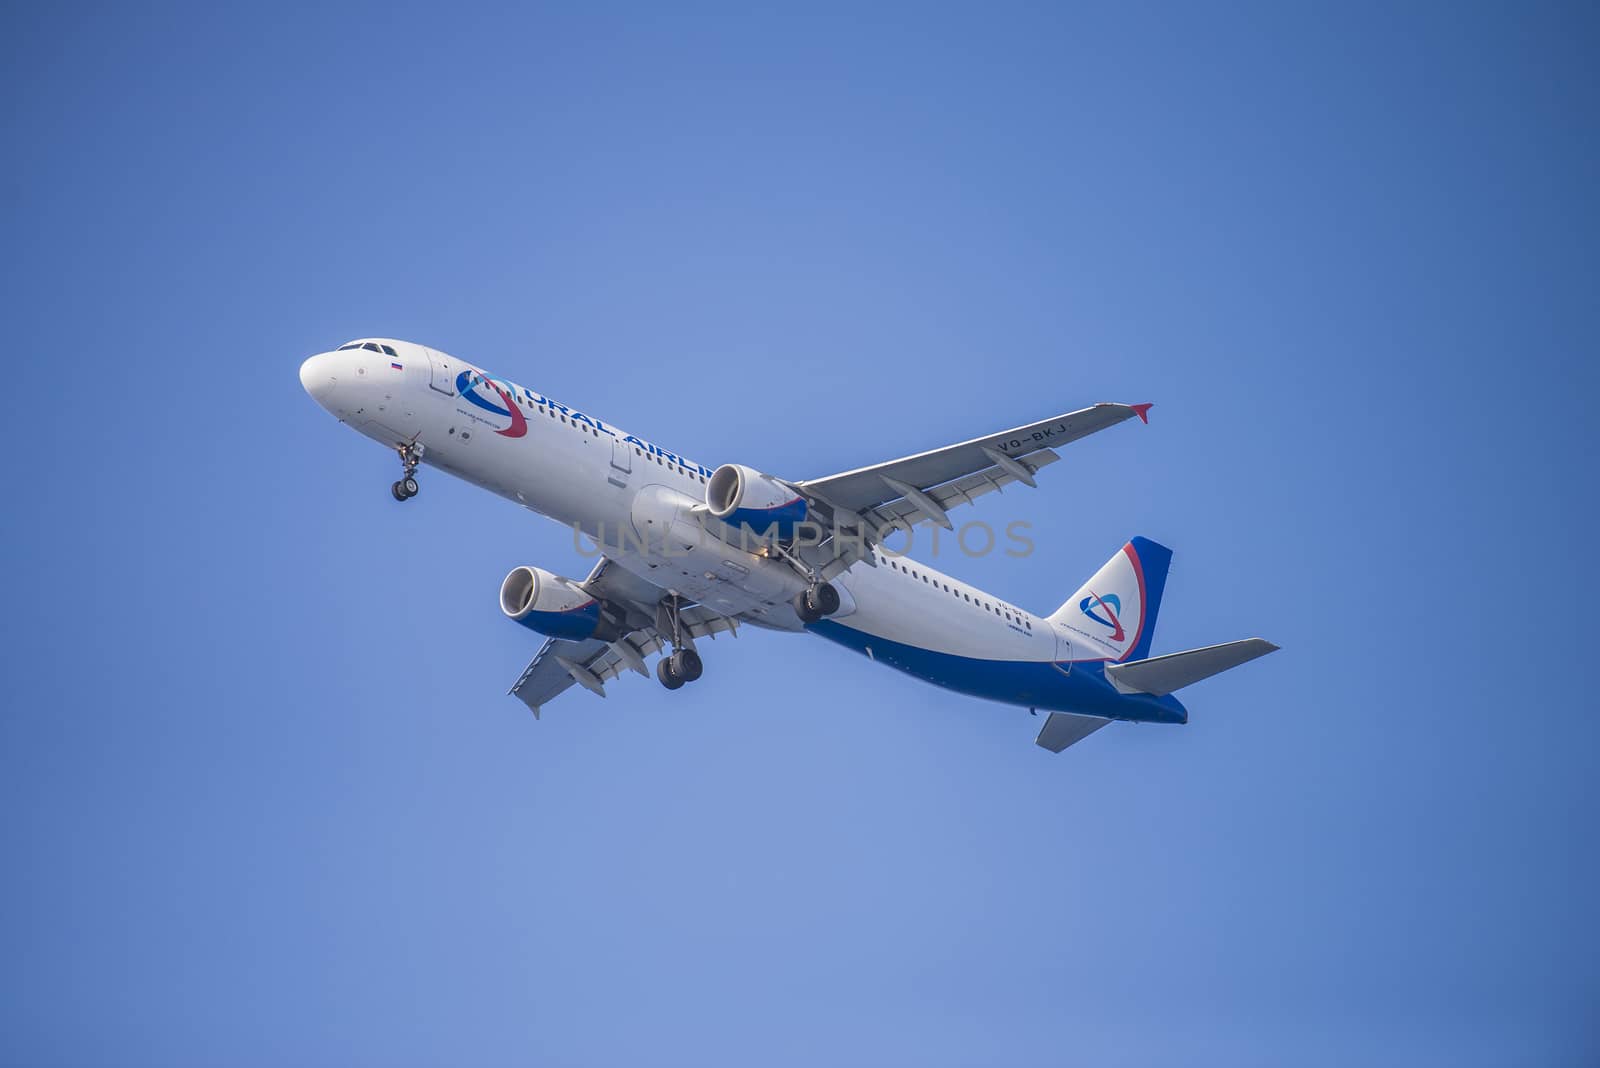 Airbus a320, Ural Airlines, Russia. The pictures of the planes are shot very close an airport just before landing. September 2013.